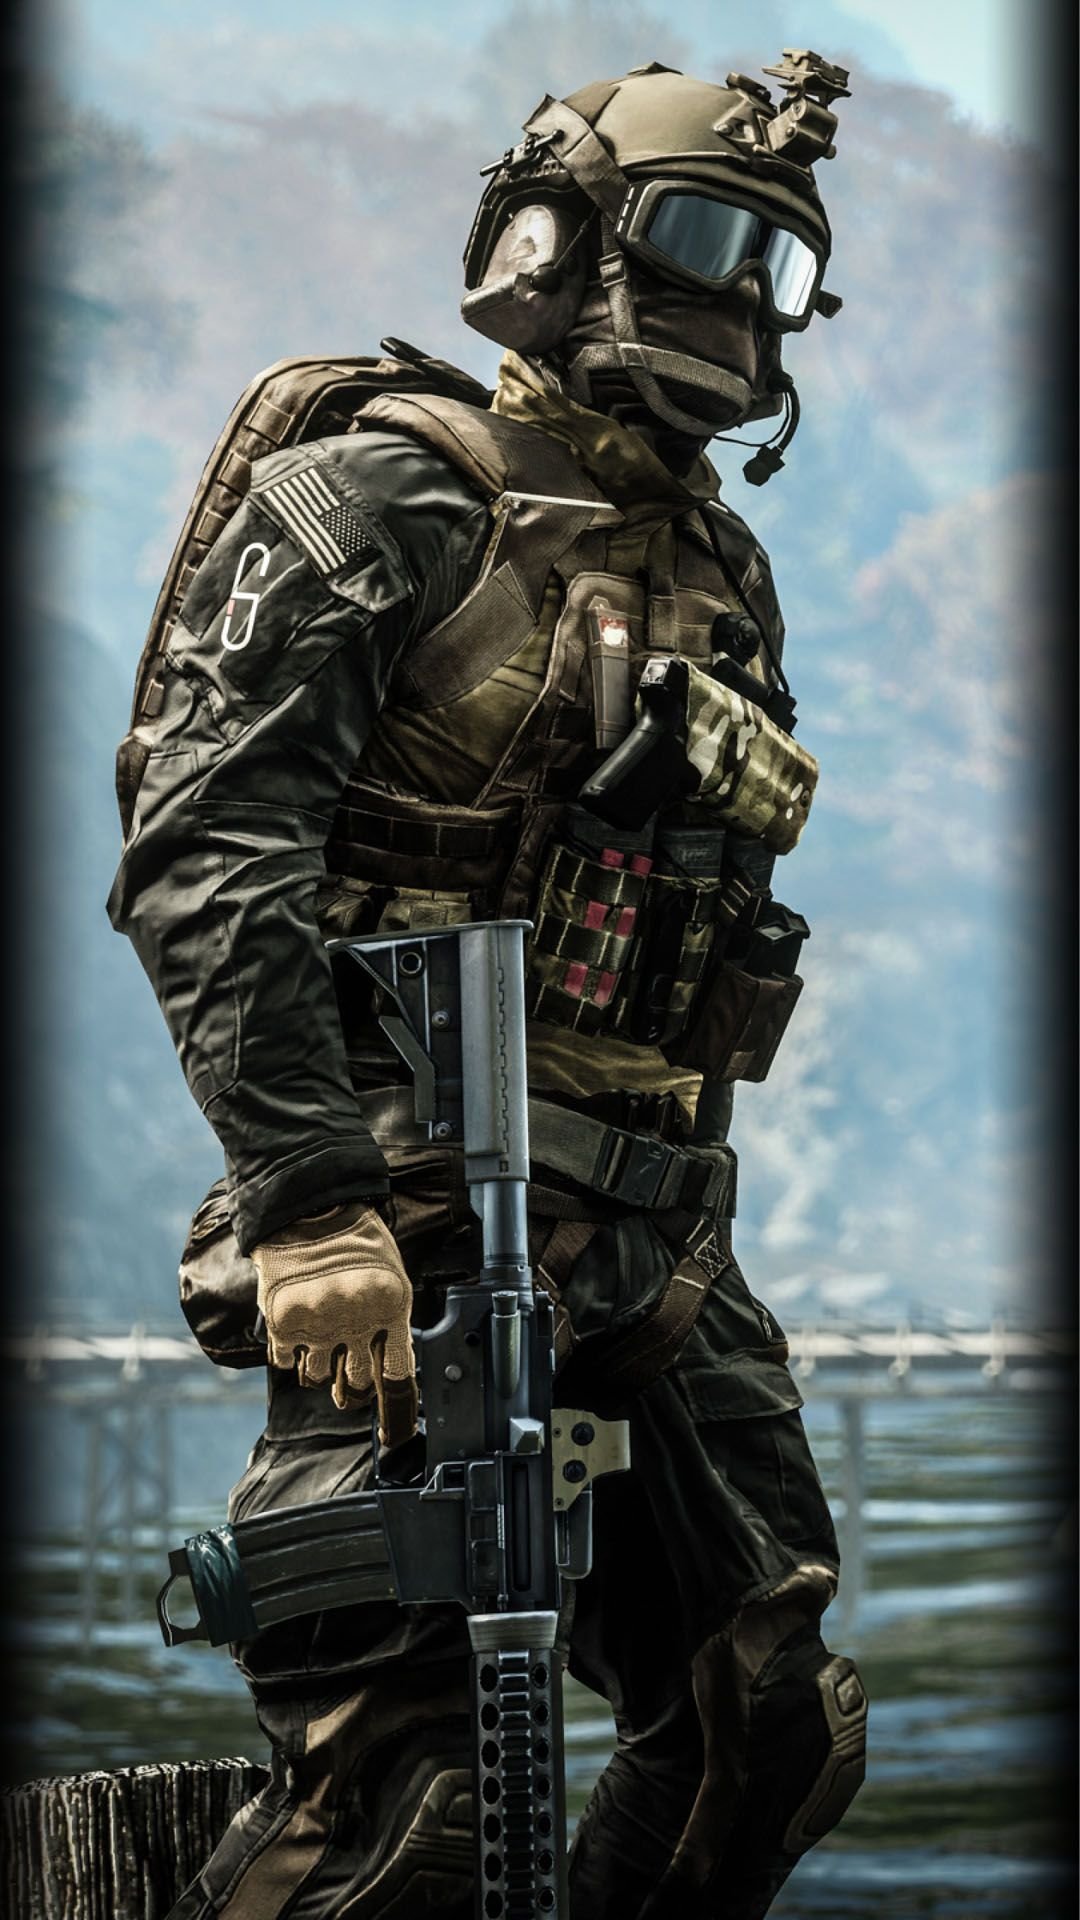 Navy Special Forces